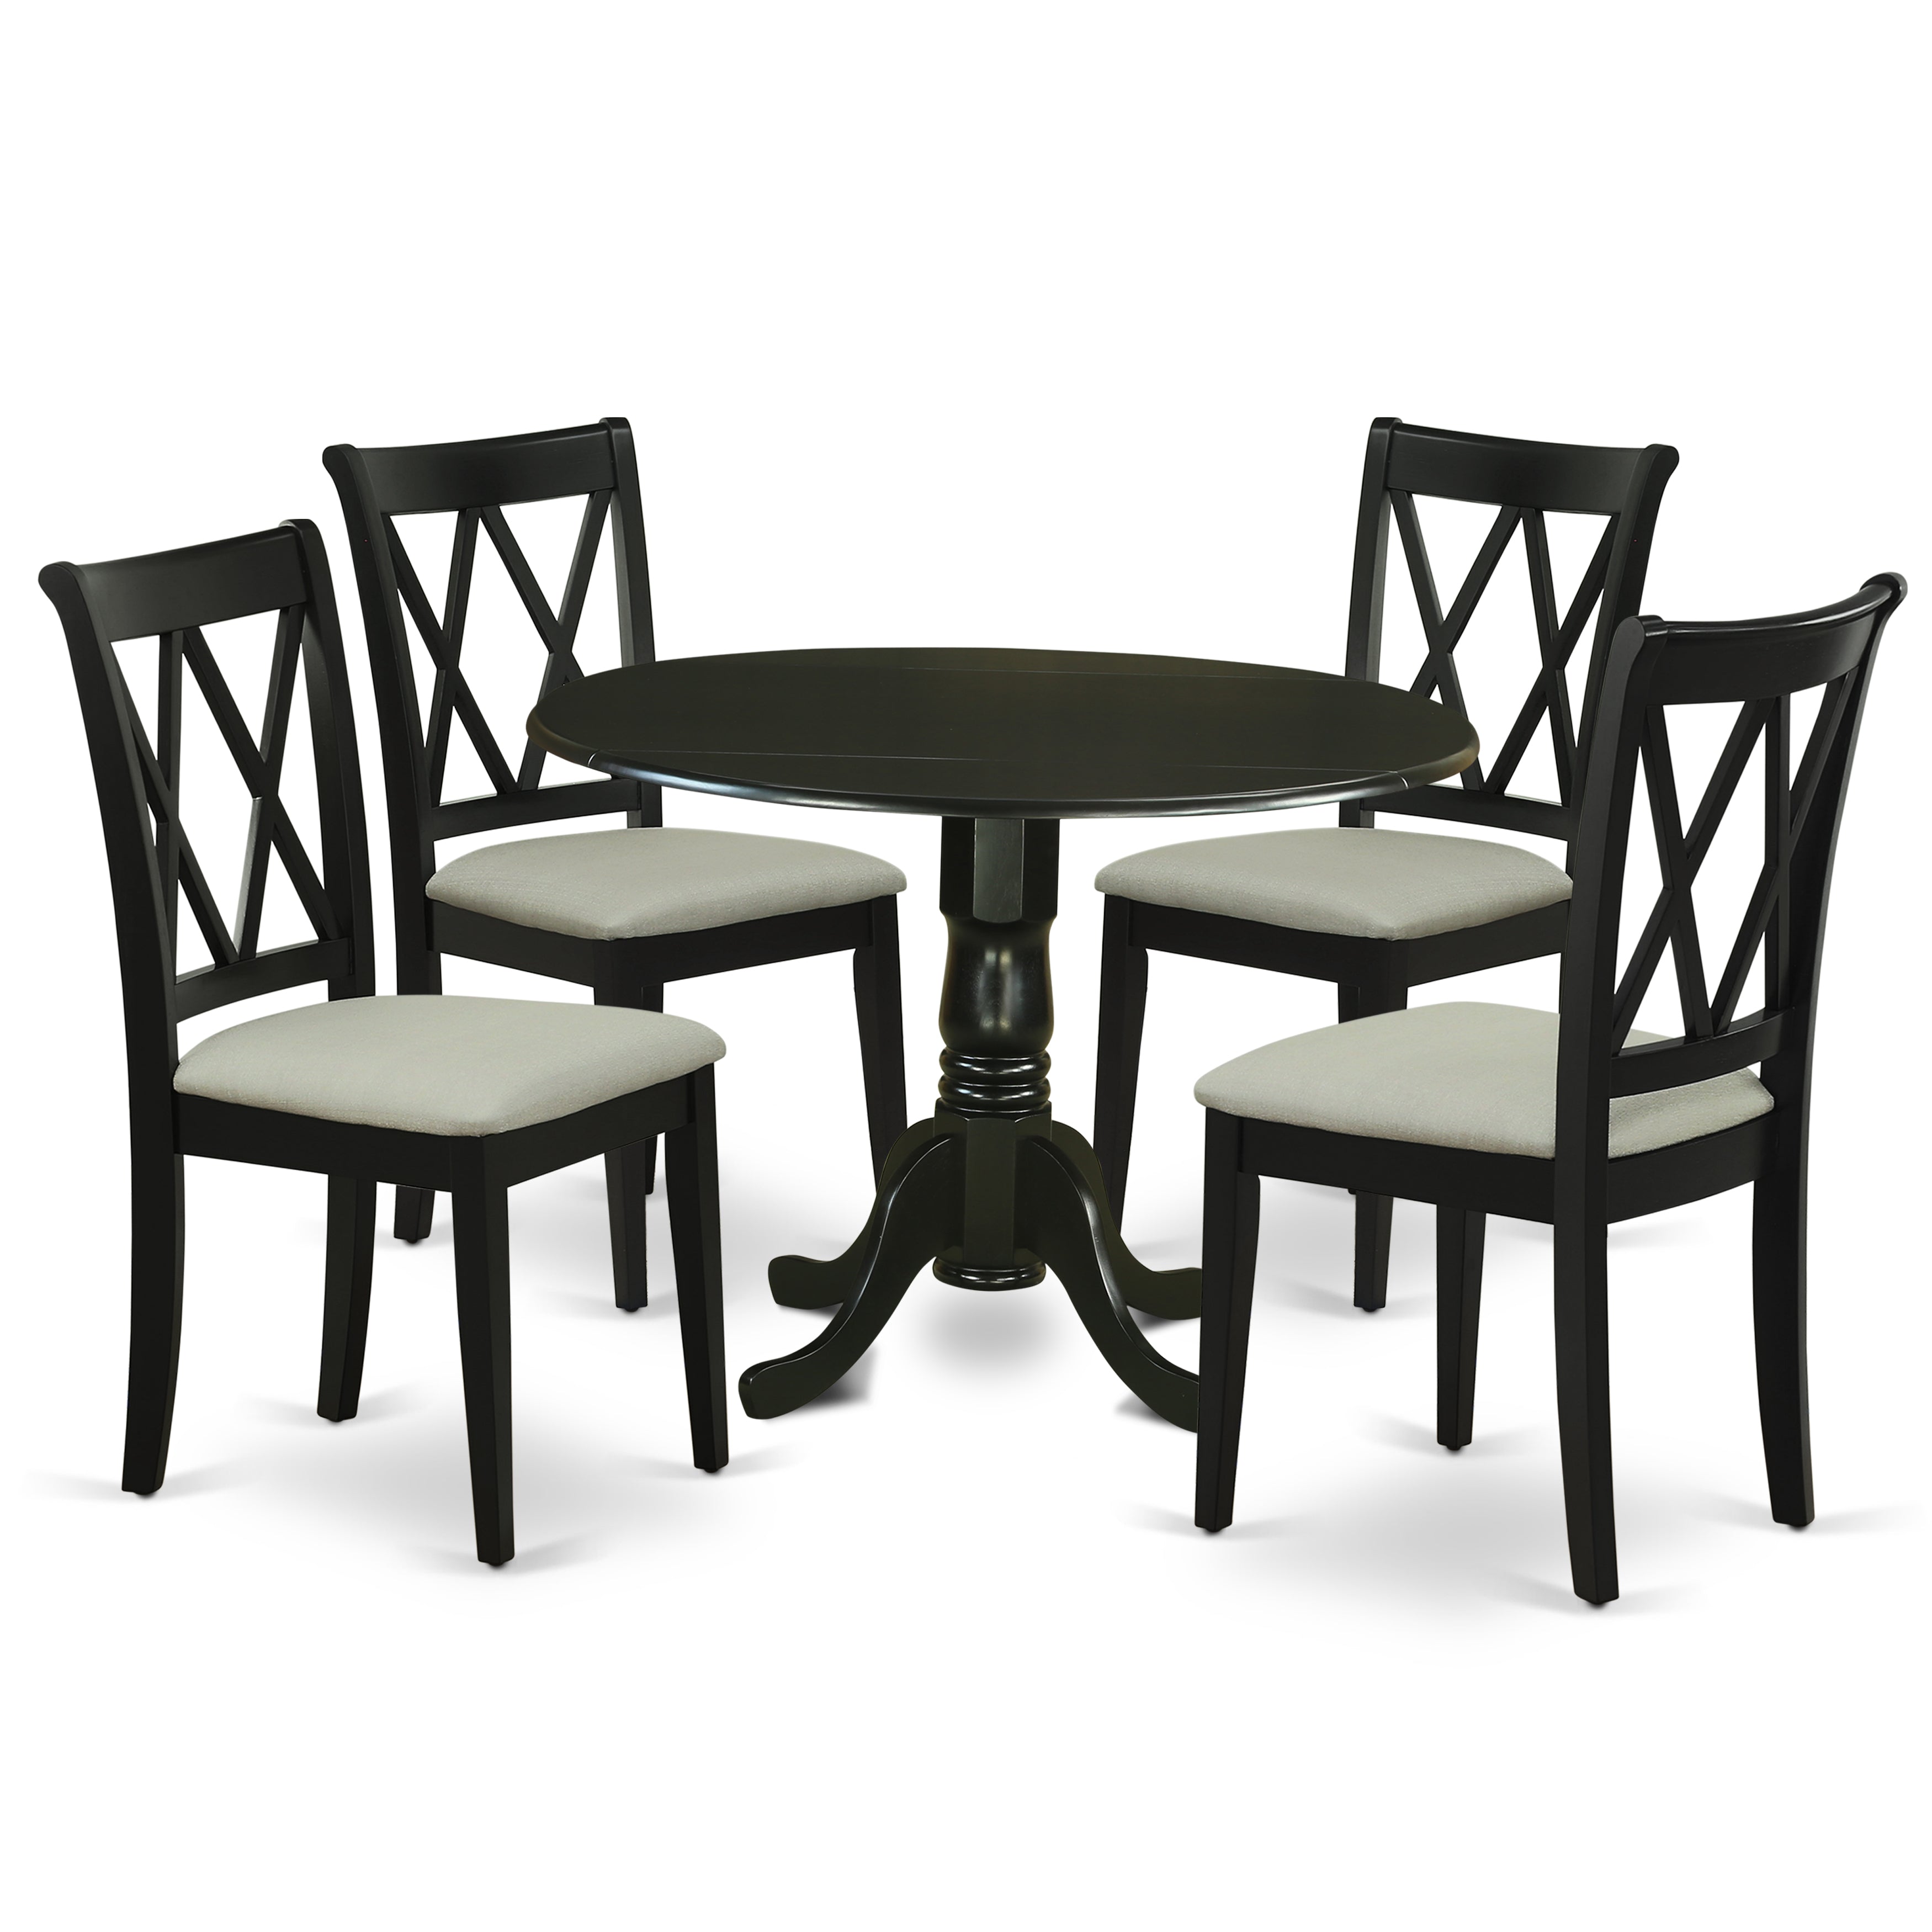 DLCL5-BLK-C 5Pc Dining Set Includes a Round Dinette Table with Drop Leaves and Four Double X Back Microfiber Seat Kitchen Chairs, Black Finish